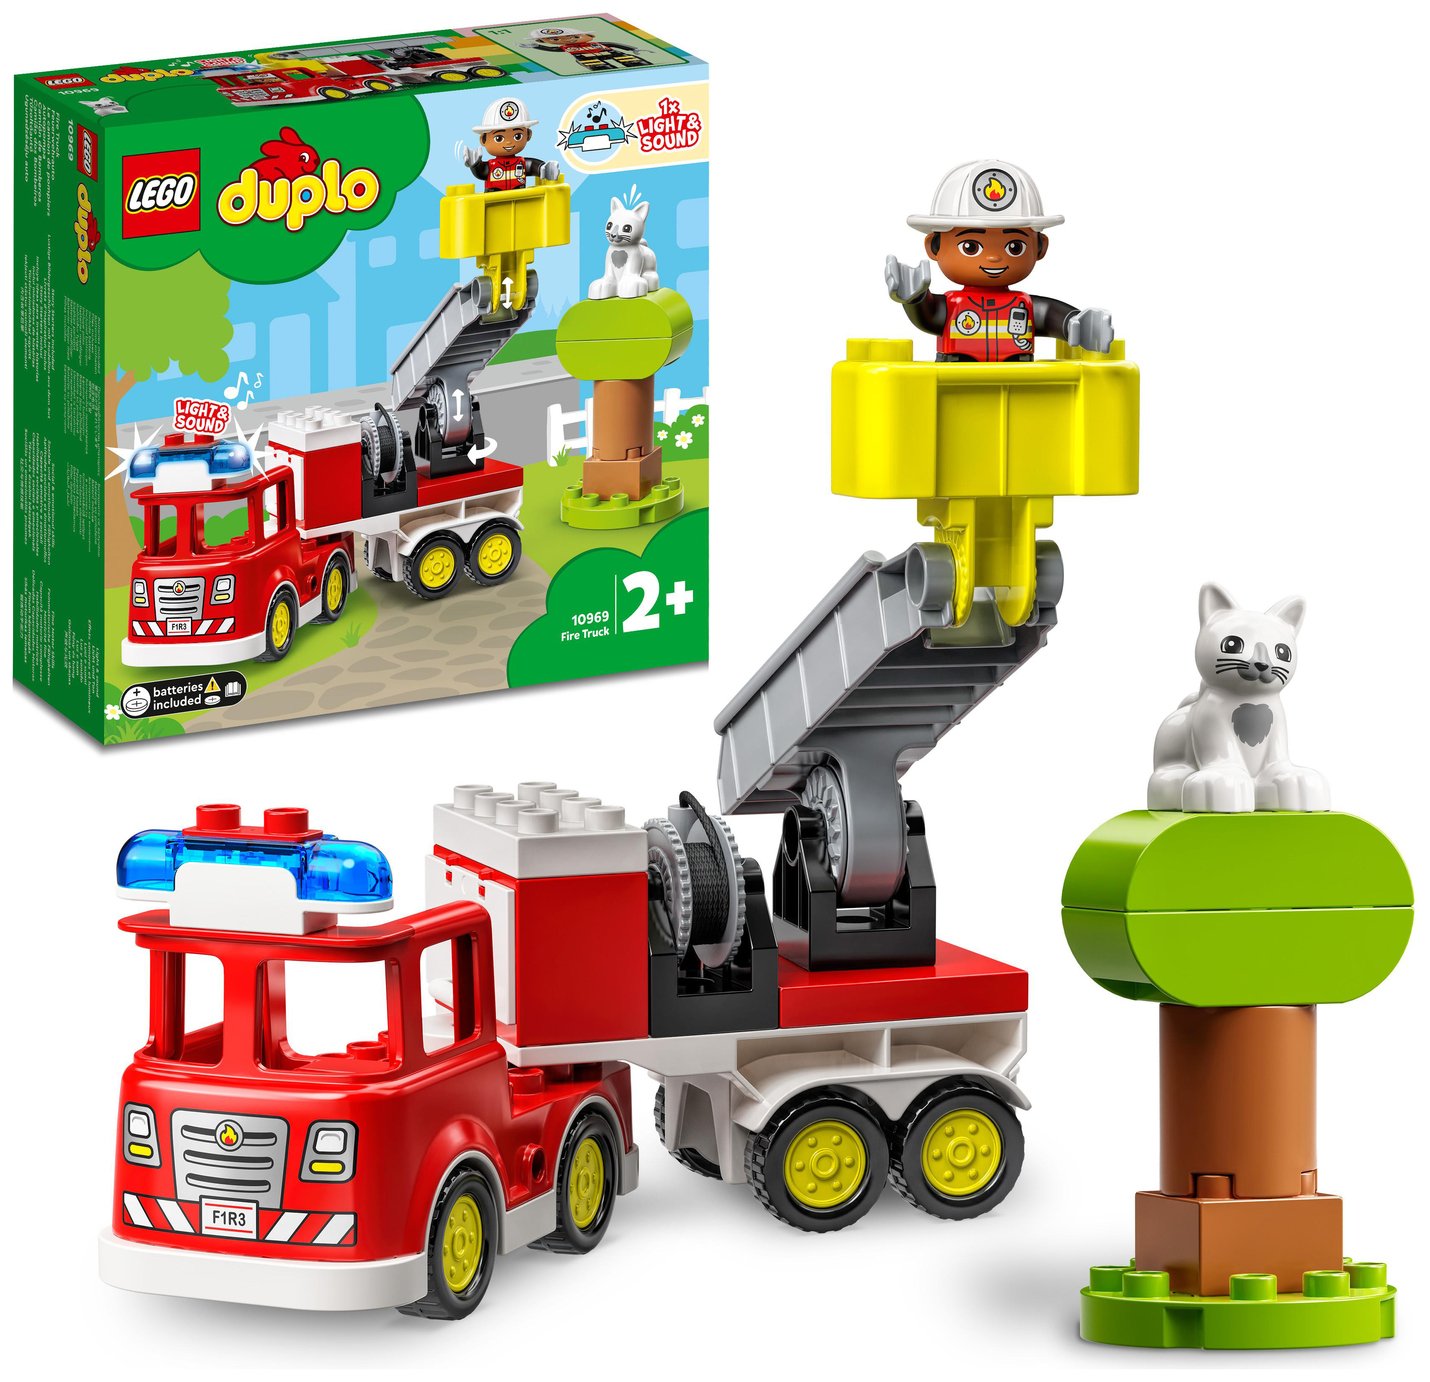 LEGO DUPLO Town Fire Engine Toy for 2 Year Olds 10969